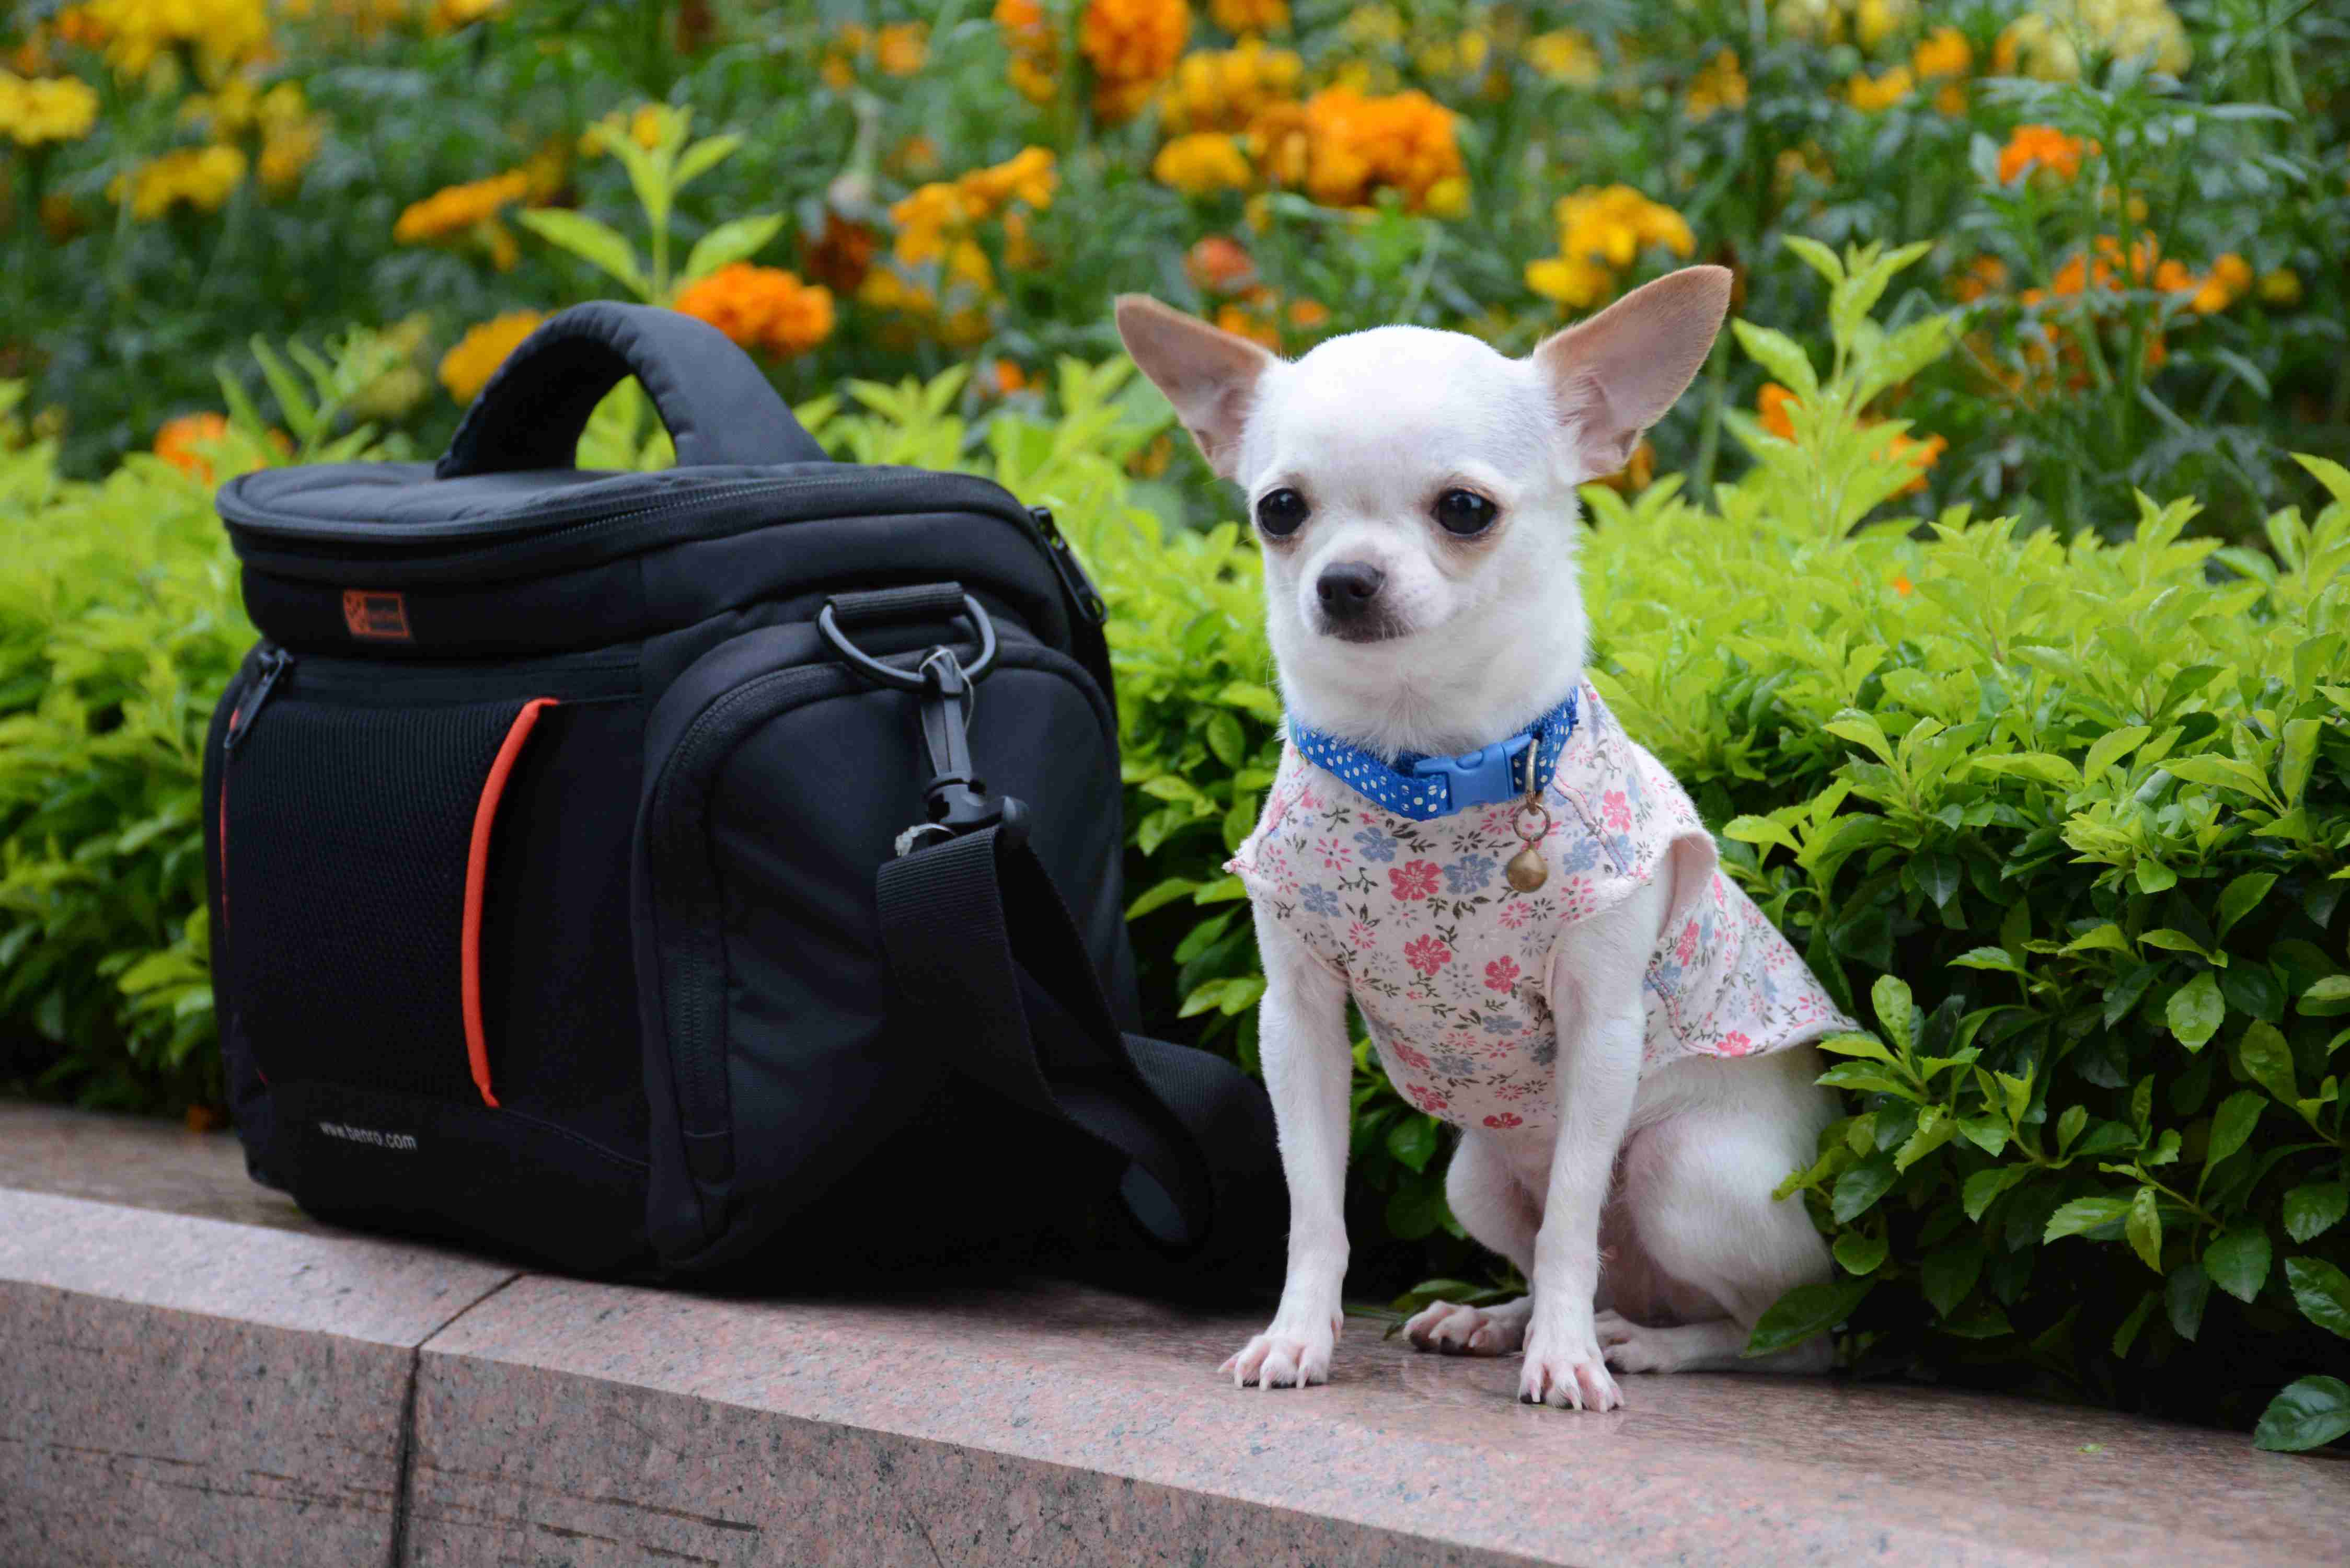 How can you effectively communicate boundaries to a Chihuahua with anger issues?